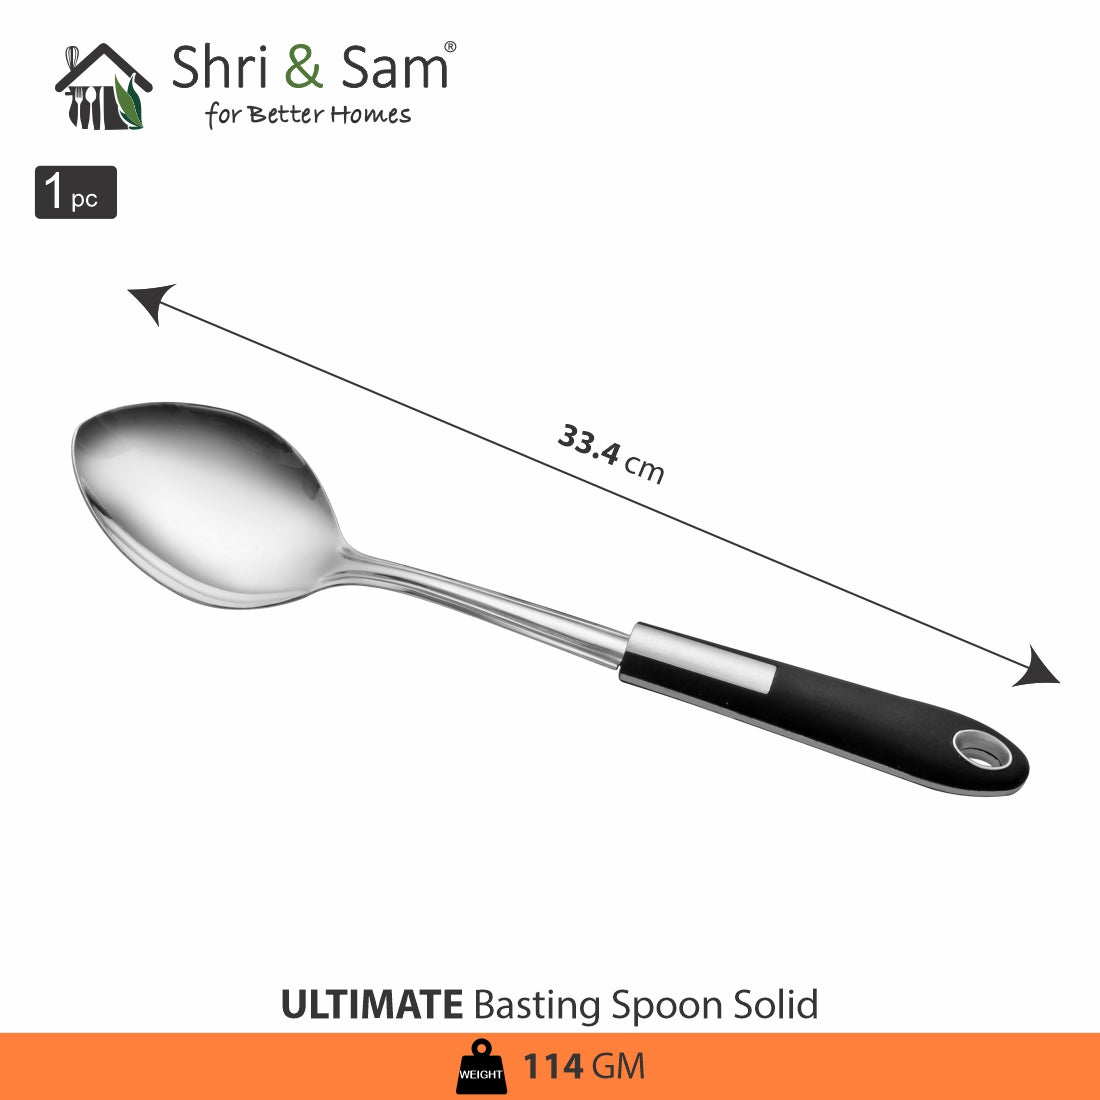 Stainless Steel Basting Spoon Solid Ultimate